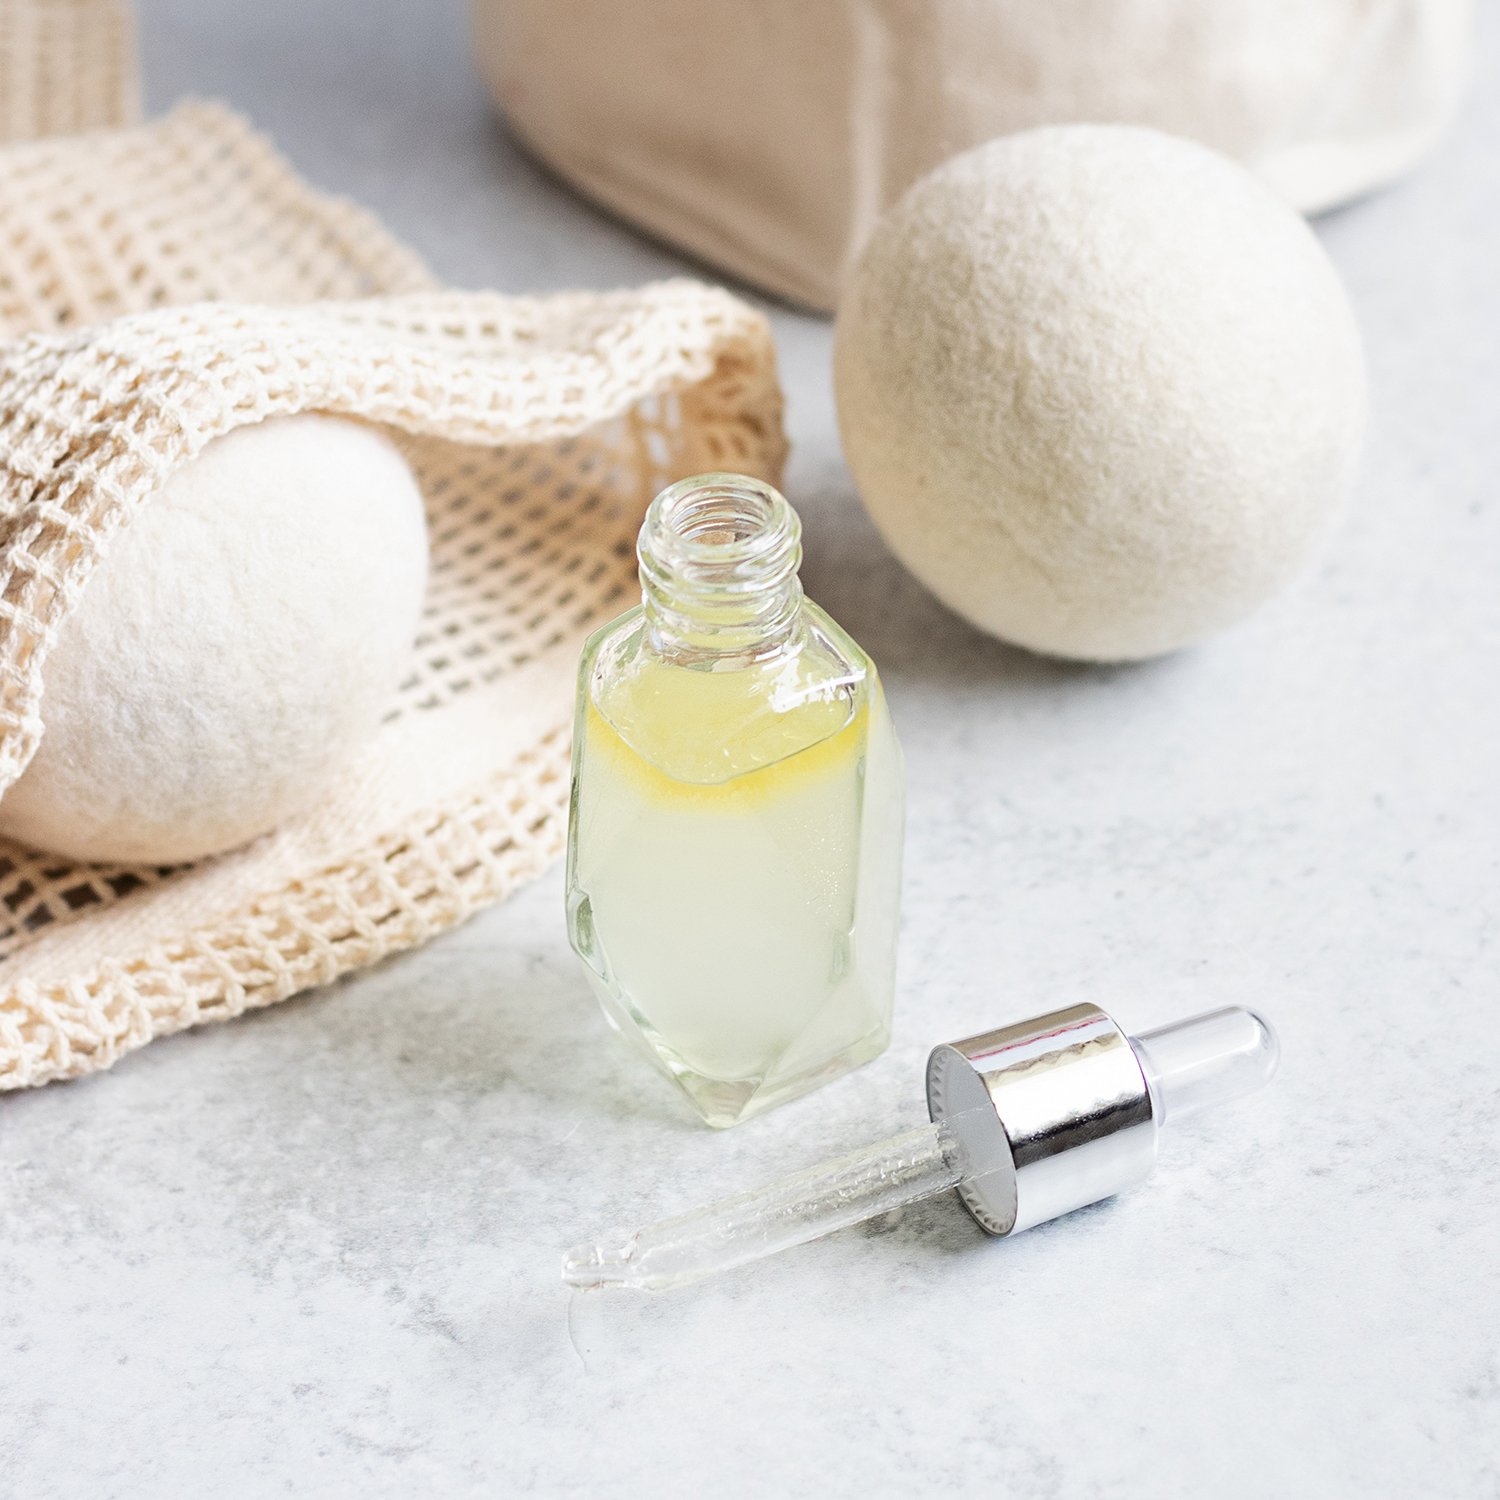 How to Use Wool Dryer Balls with Essential Oils